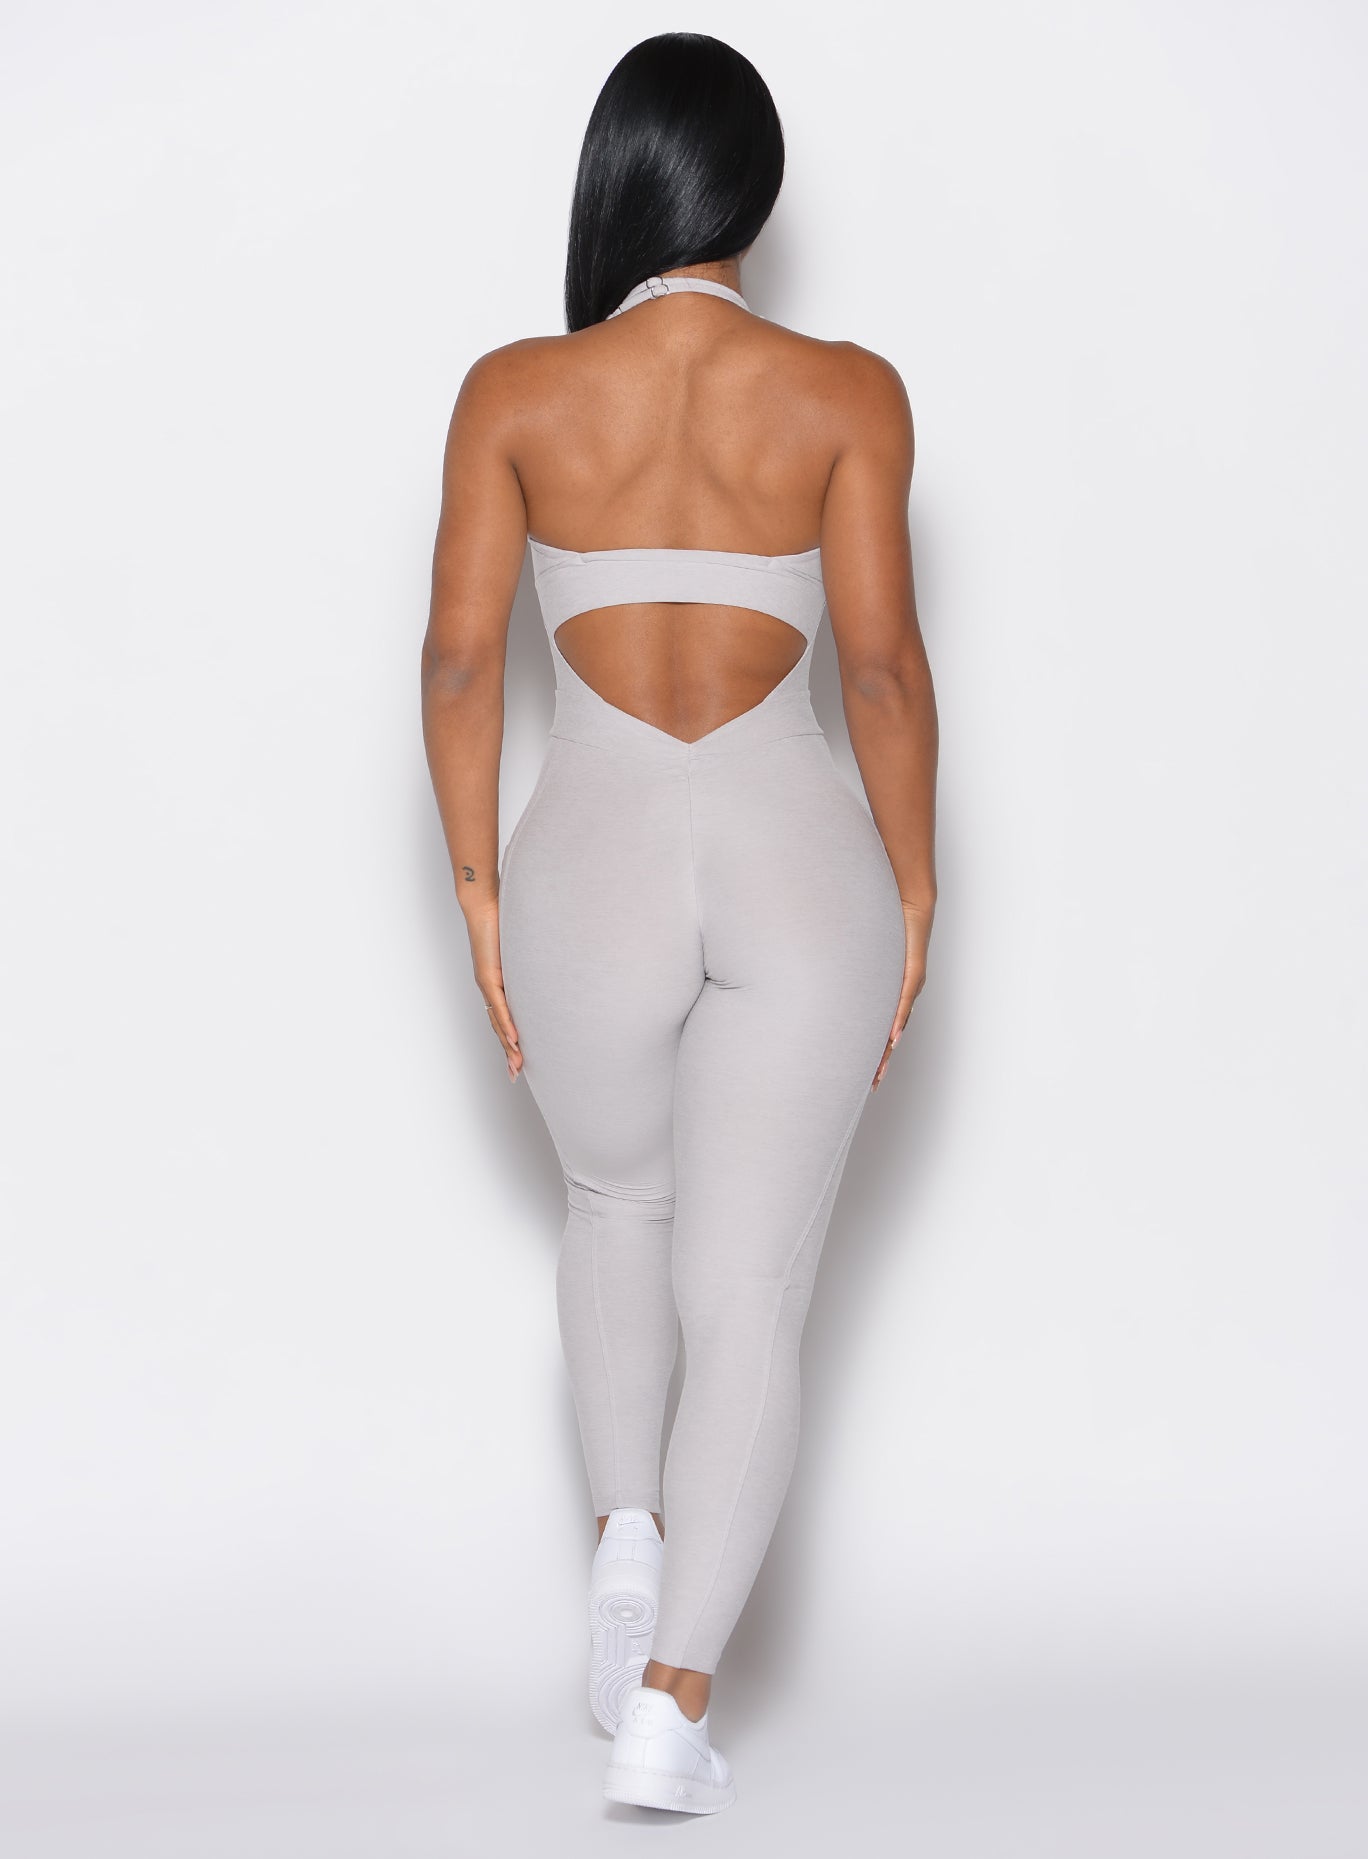 back profile view of a model wearing our Backless Pocket Bodysuit in ice color